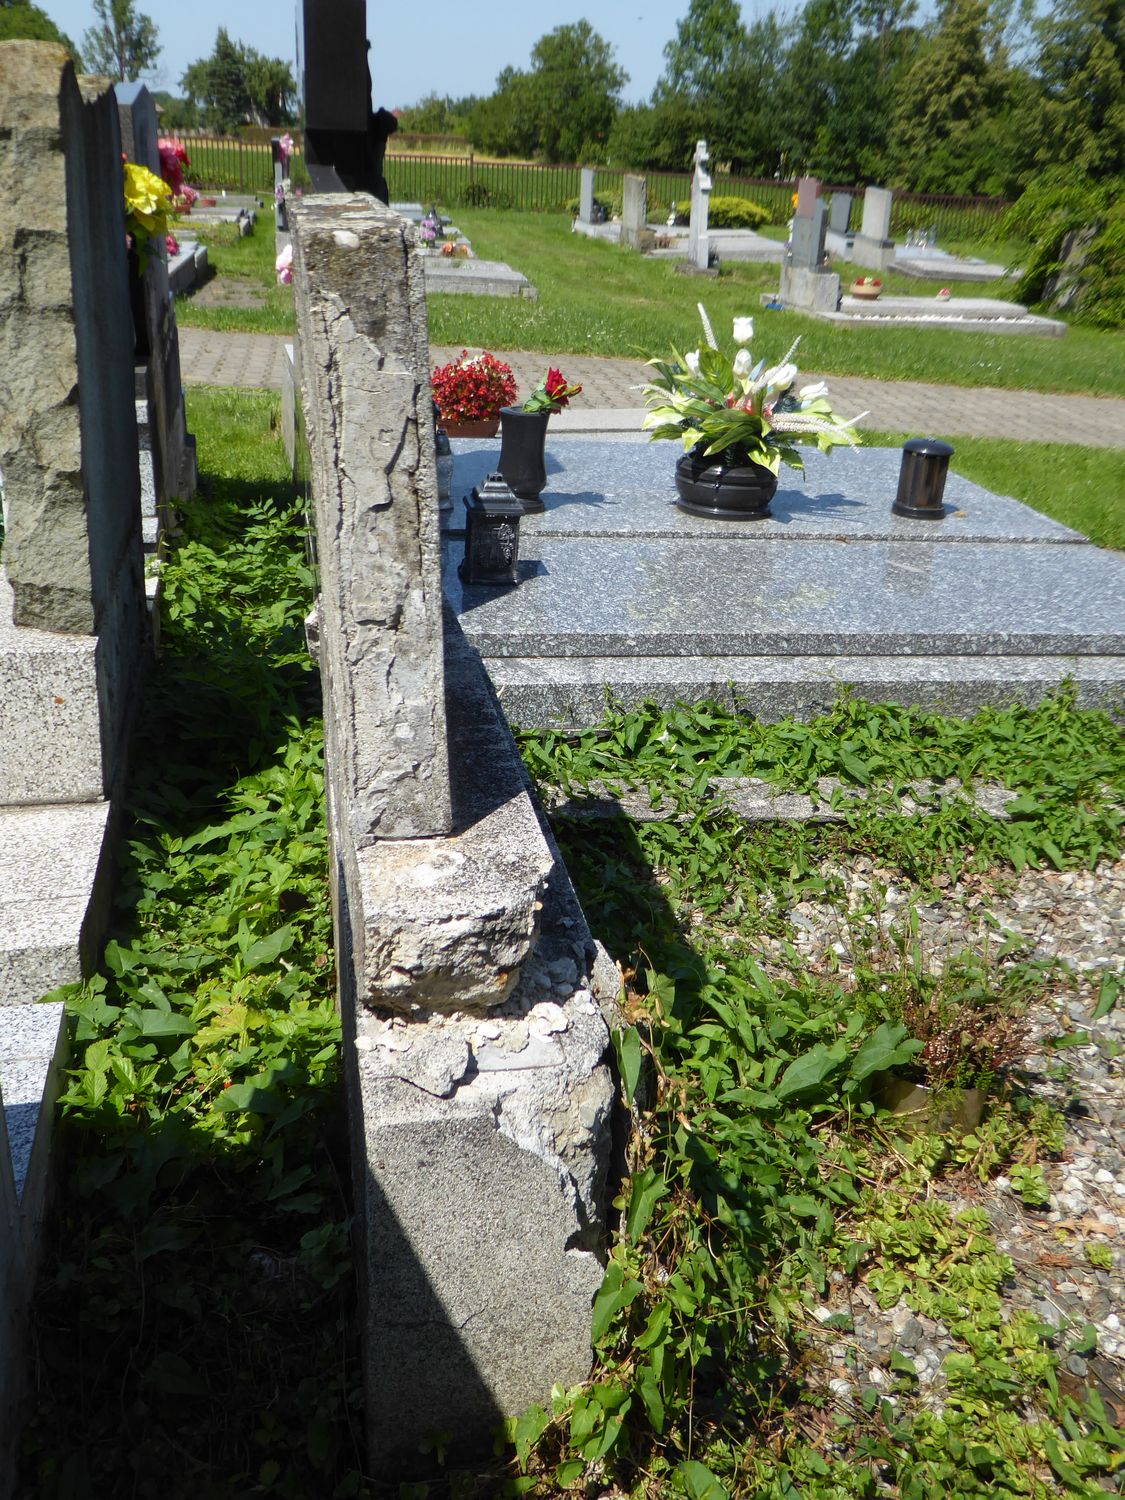 Fragment of a tombstone of the Sabelová family from the cemeteries of the Czech part of Těšín Silesia, as of 2022.